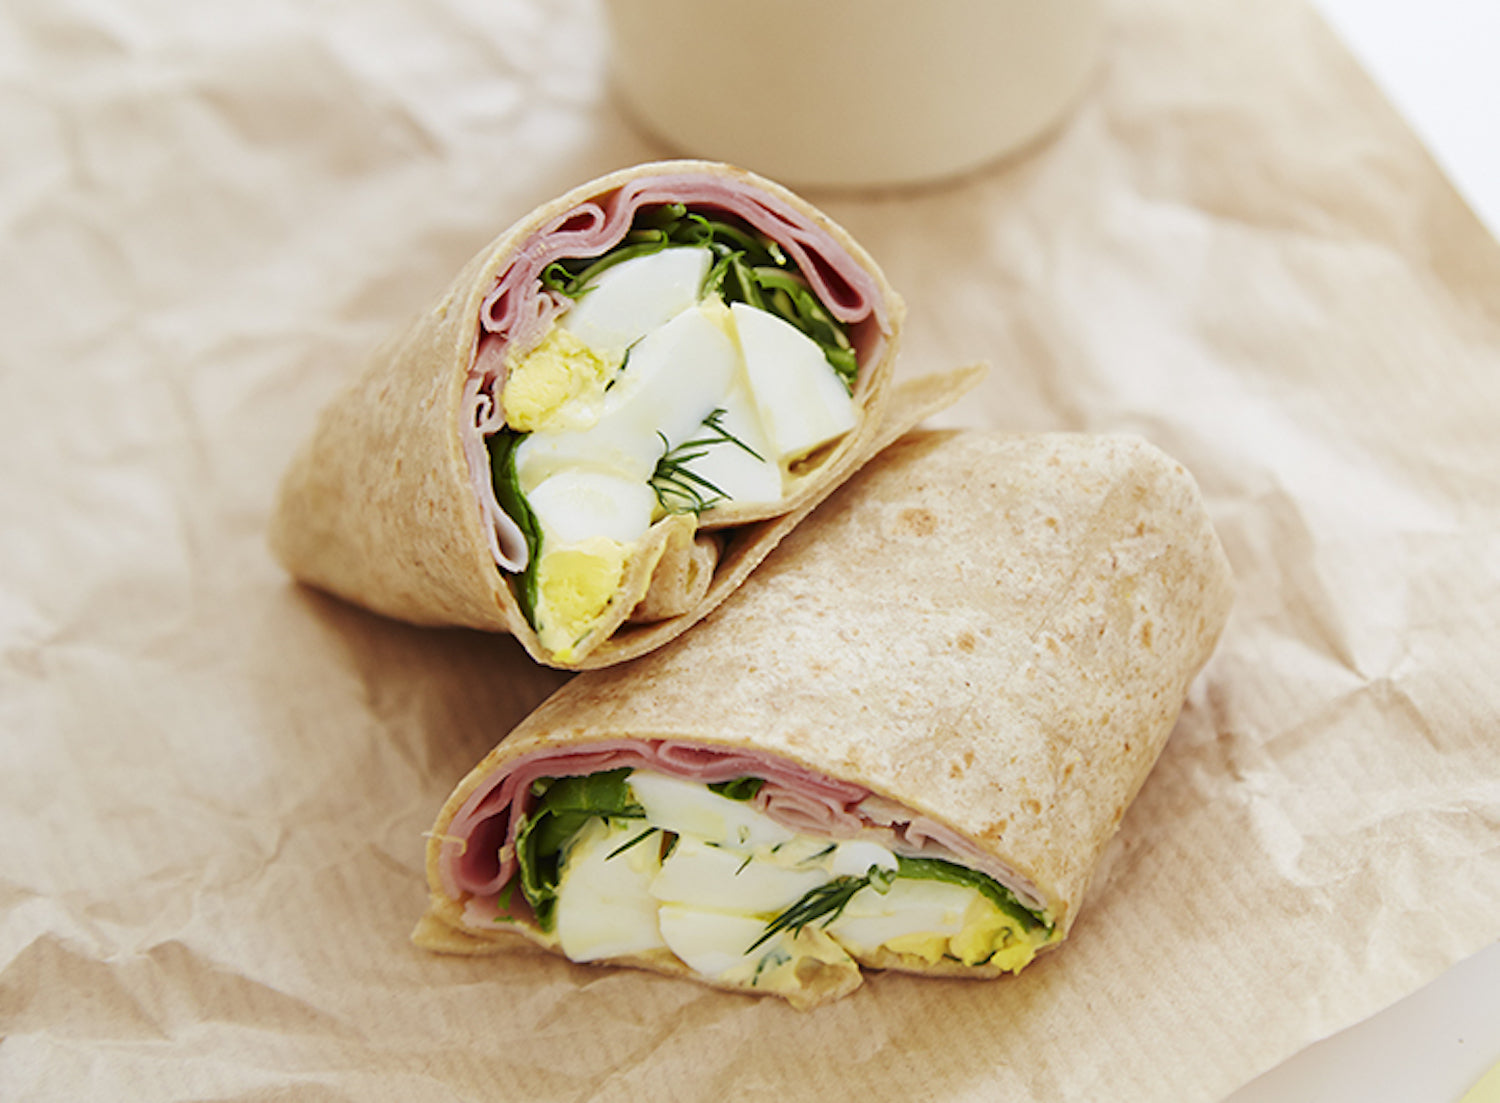 Recipe: Egg Wraps with Ham and Greens